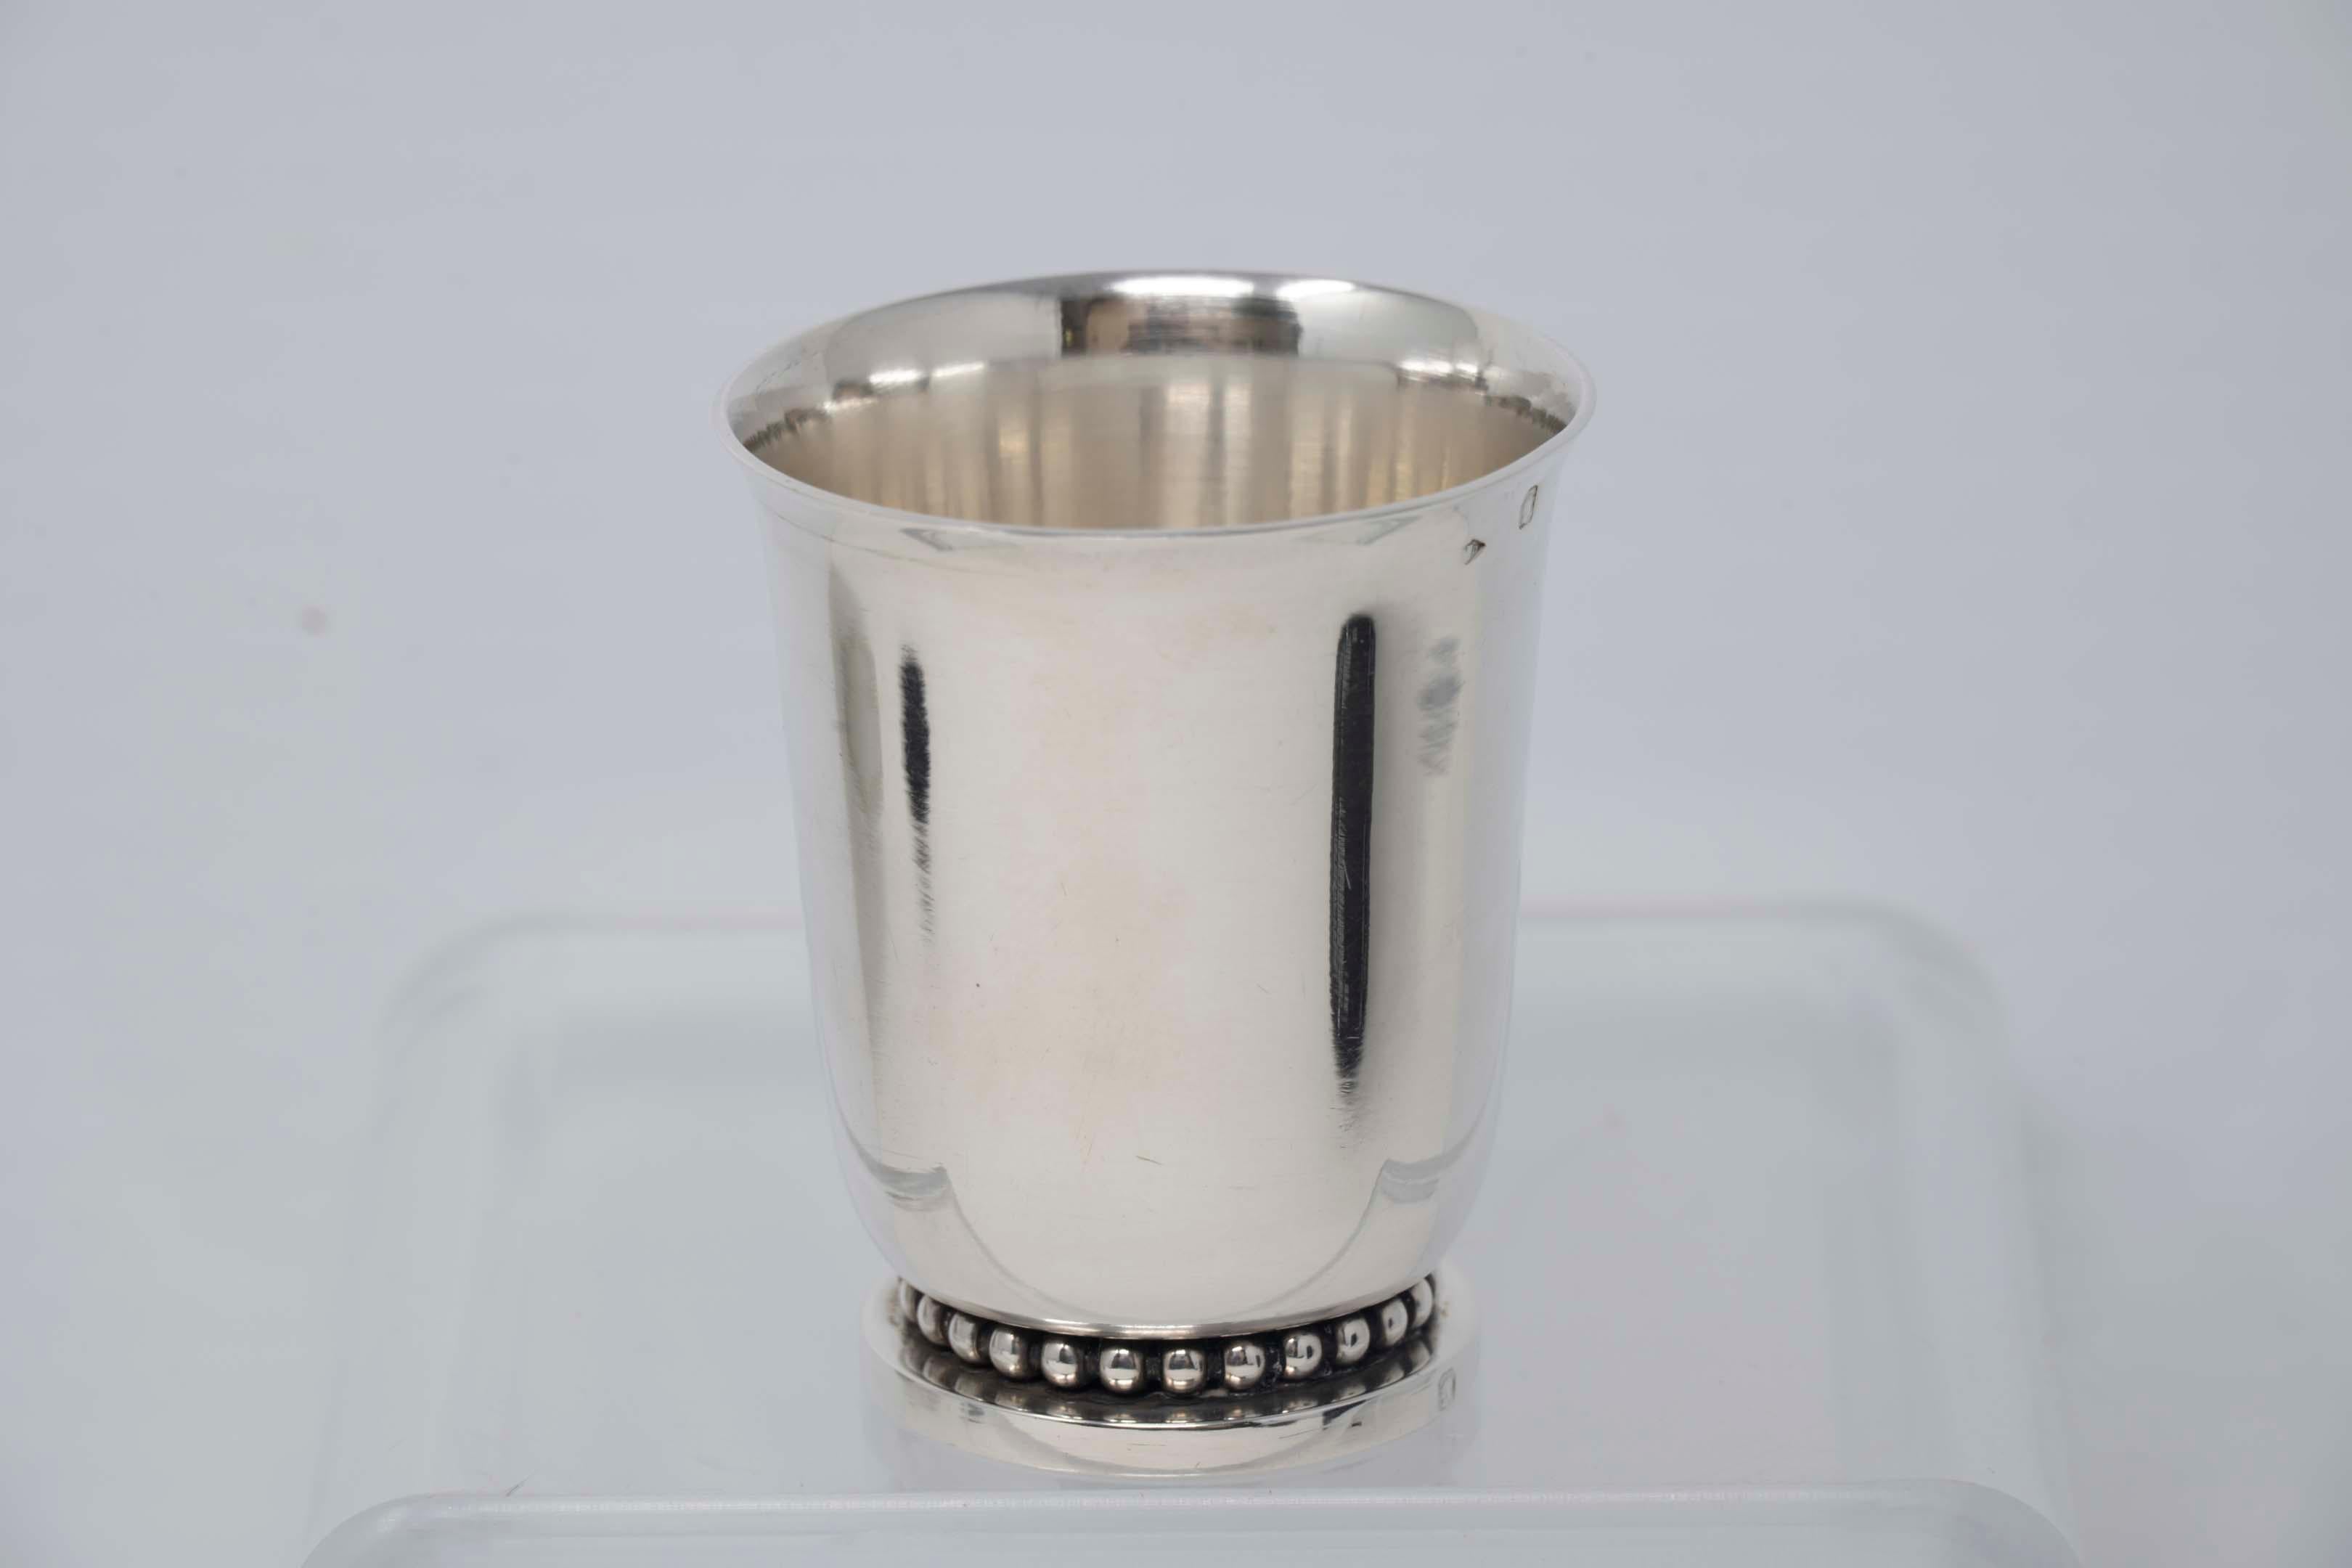 Jean Despres art deco sterling silver beaker. The beaker measures 2 1/2 inches tall. It is signed on the base J. Despres. The maker mark and Minerve mark are on the side. It's in excellent condition.
